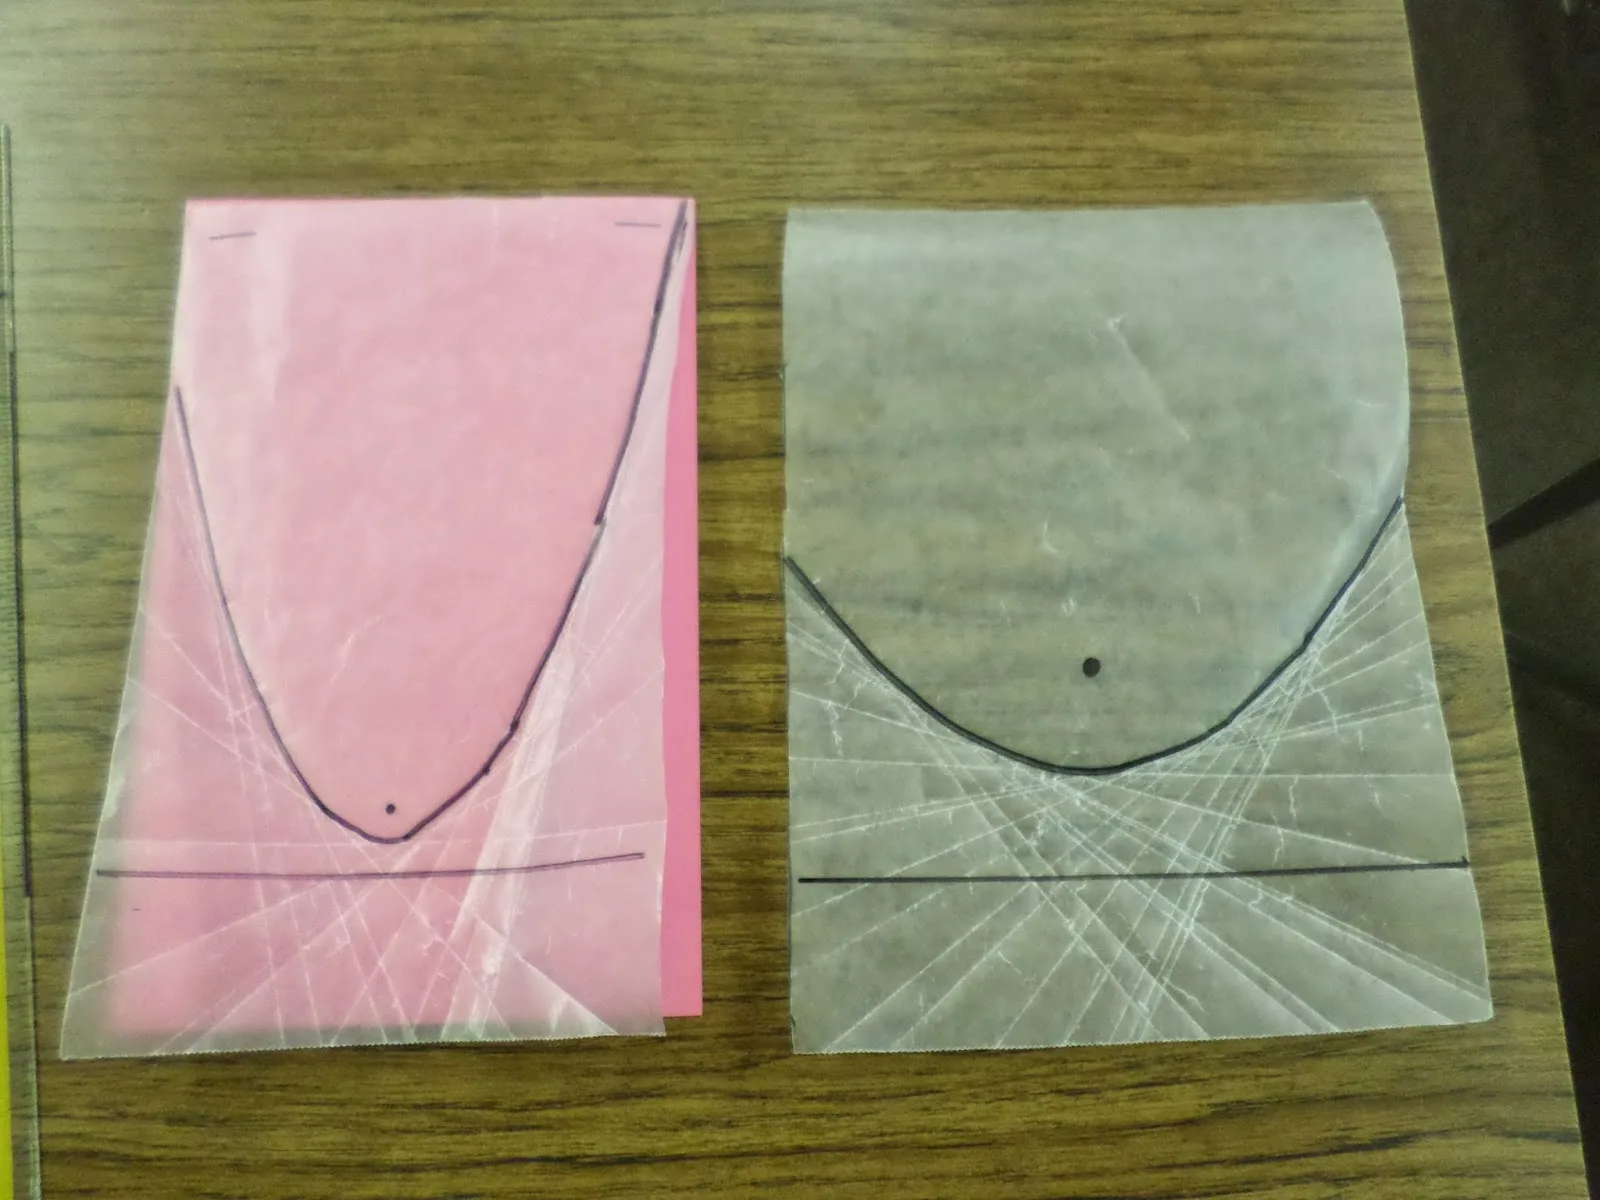 Illustration of Different Placement of Focus for wax Paper Parabola Activity. 